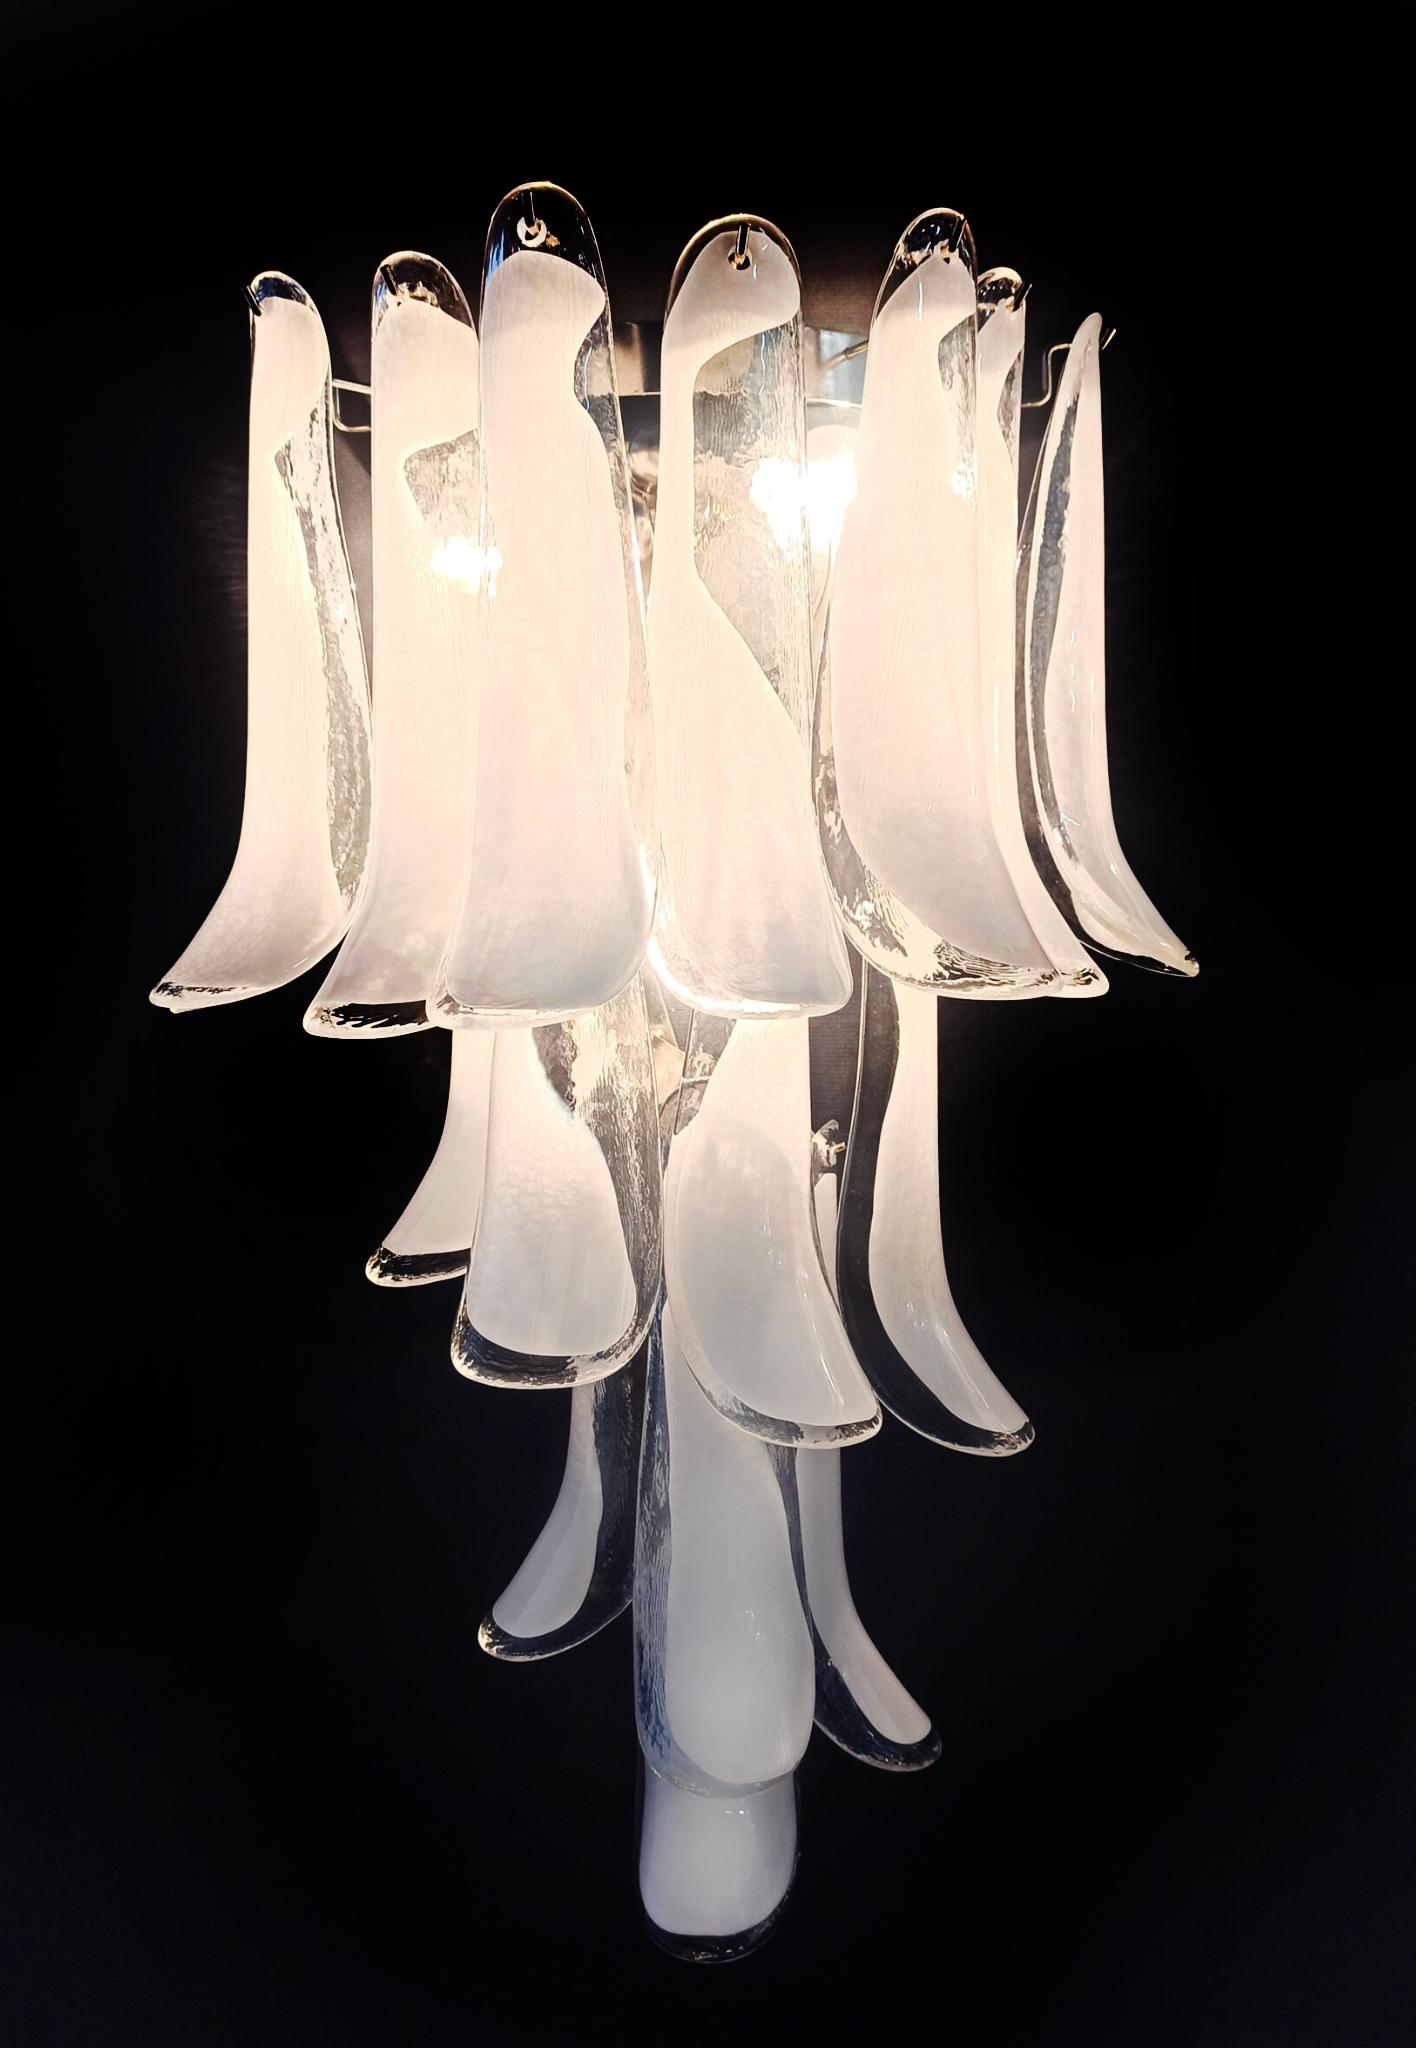 Set Four of Vintage Italian Murano wall sconces. Wall lights have 16 clear and white“lattimo” glasses (for each applique) in a nickel-plated metal frame. Decorative object of great importance.
Period: late XX century
Dimensions: 27,90 inches (72 cm)